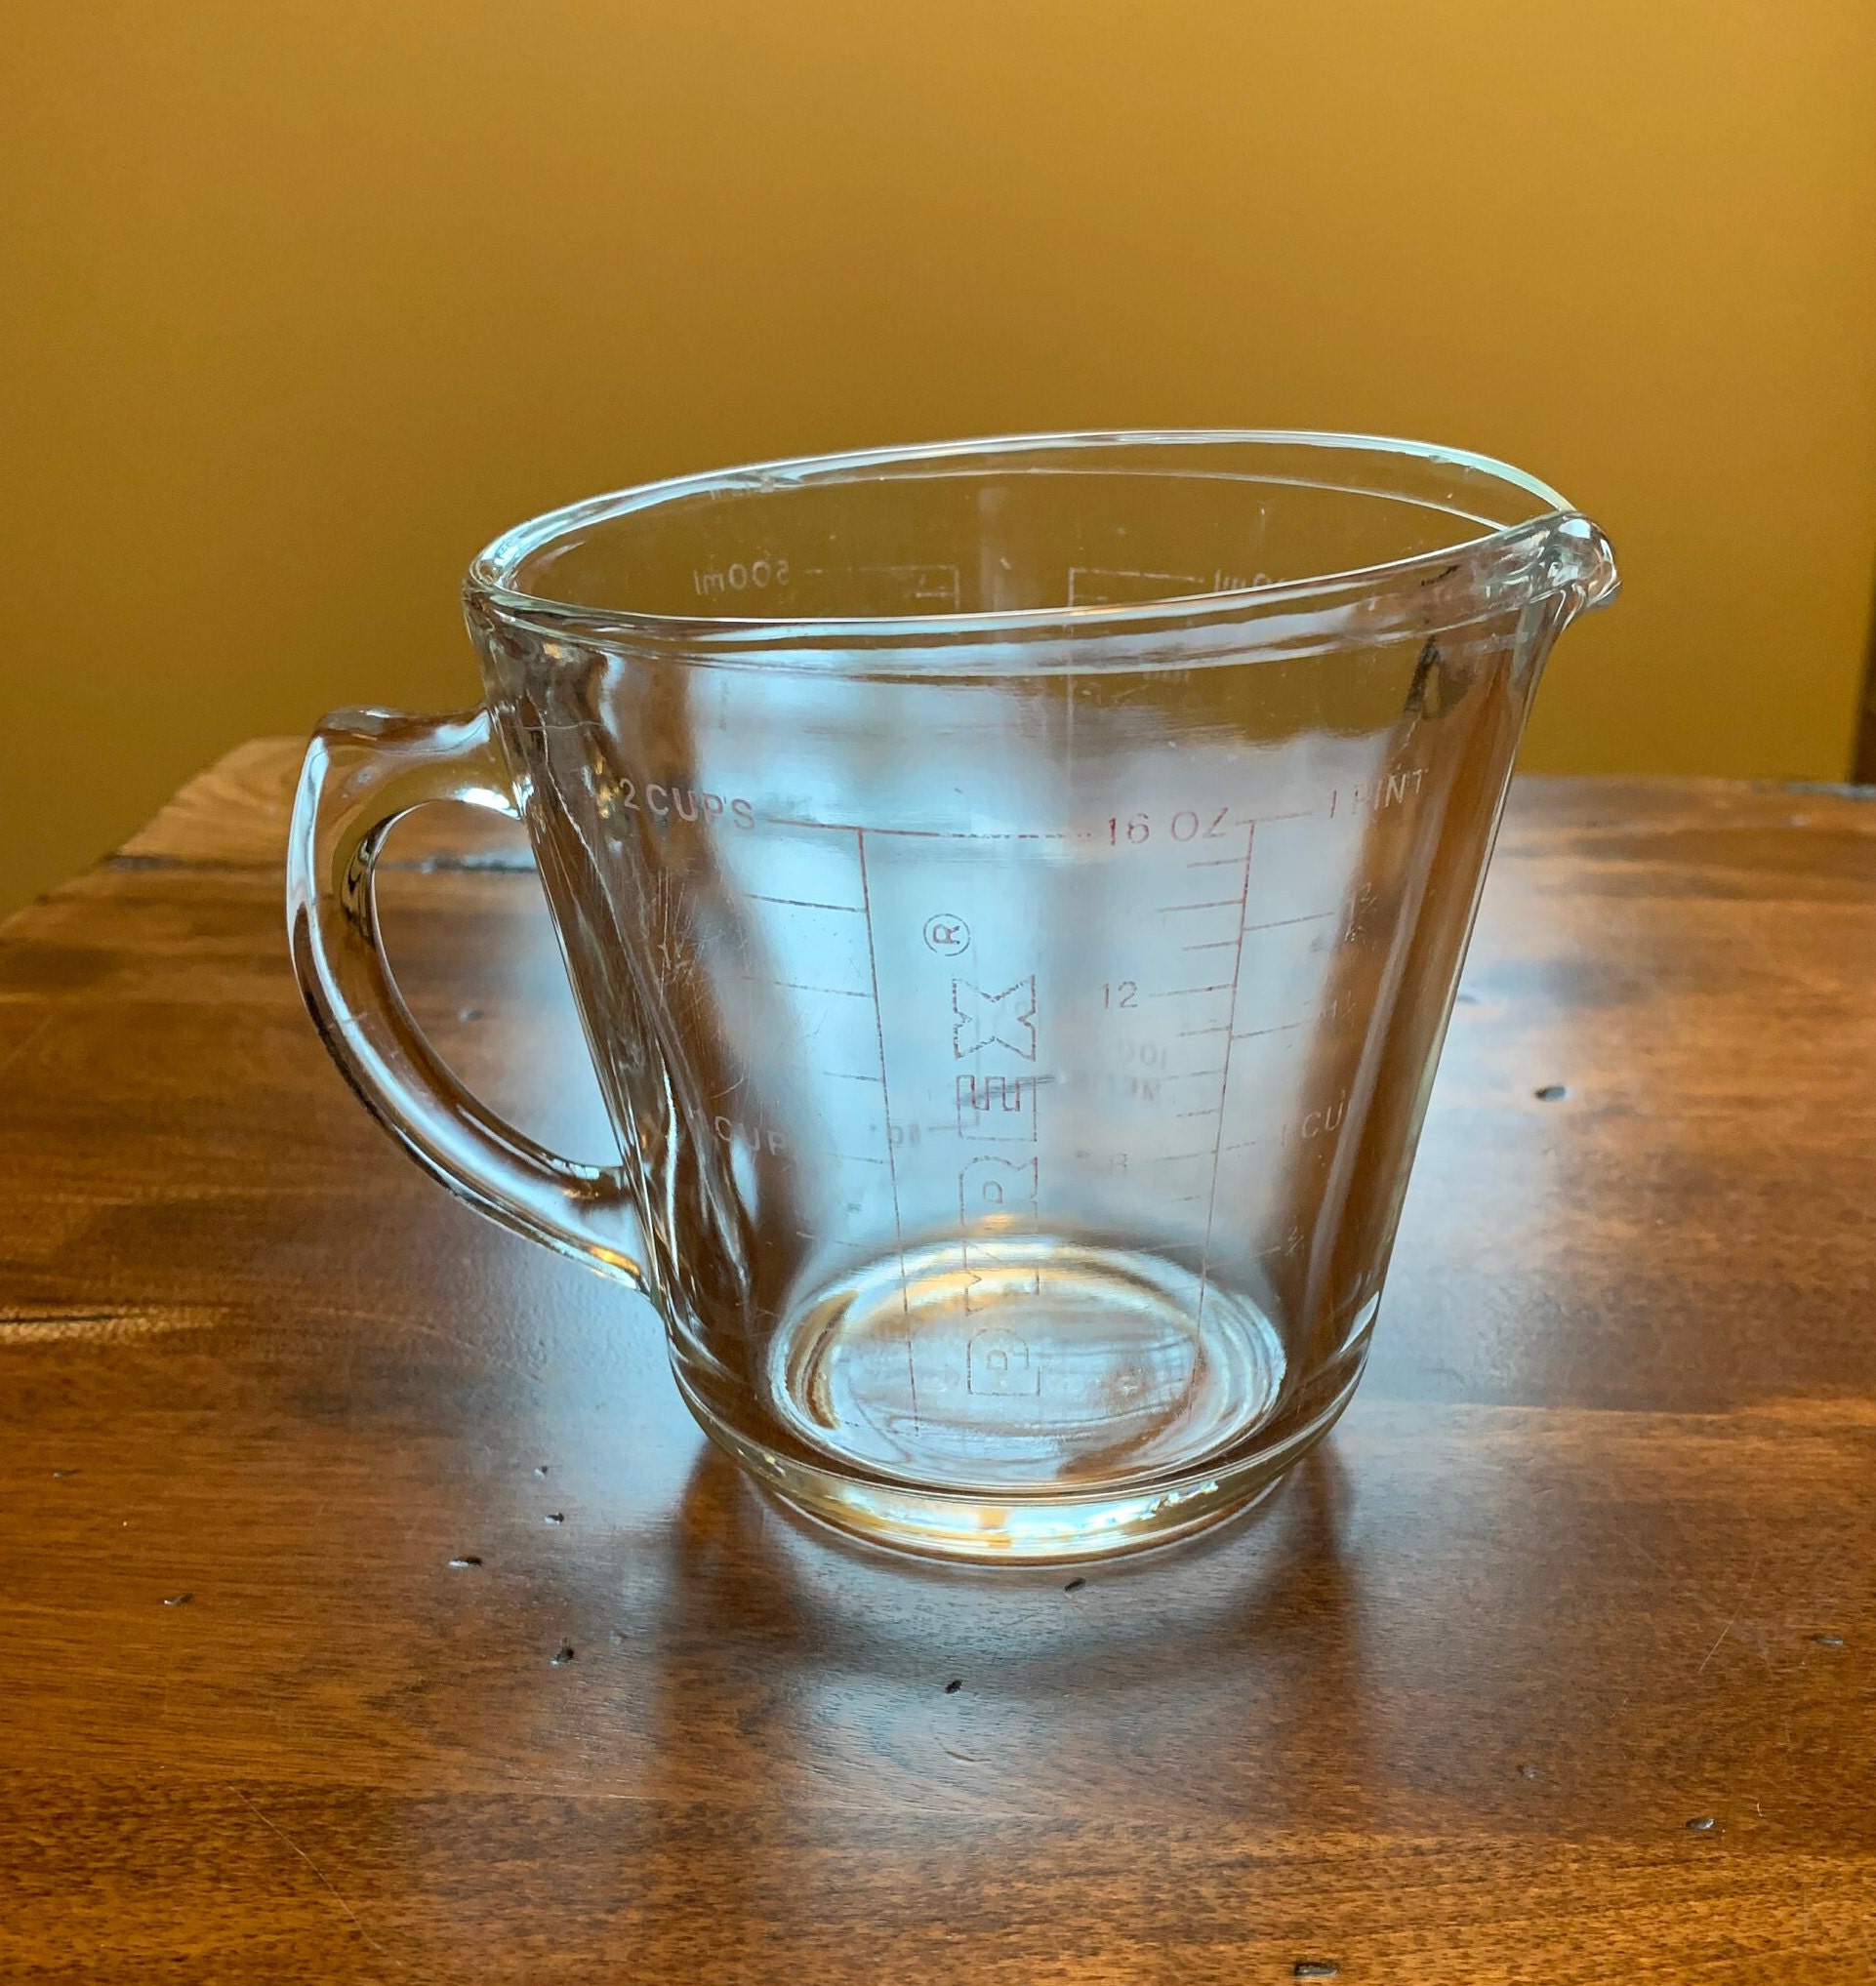 Pyrex Measuring Cup 2 Cup Unattached Handle 